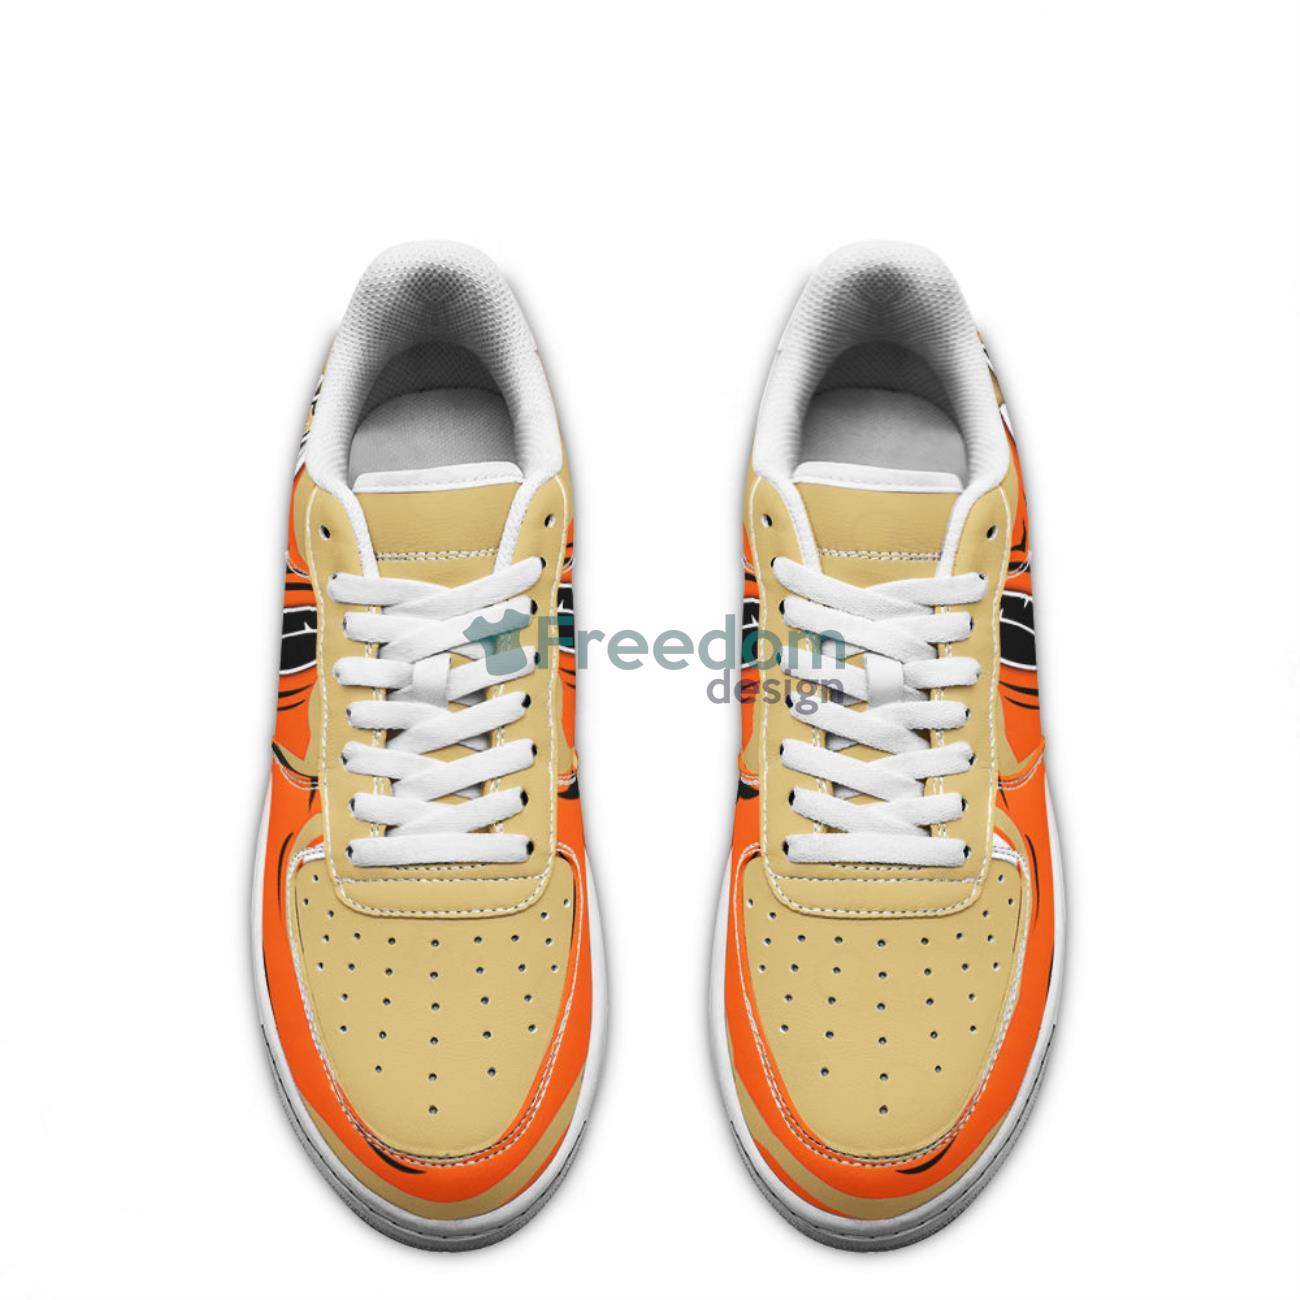 Anaheim Ducks Air Shoes Sneakers For Fans Product Photo 2